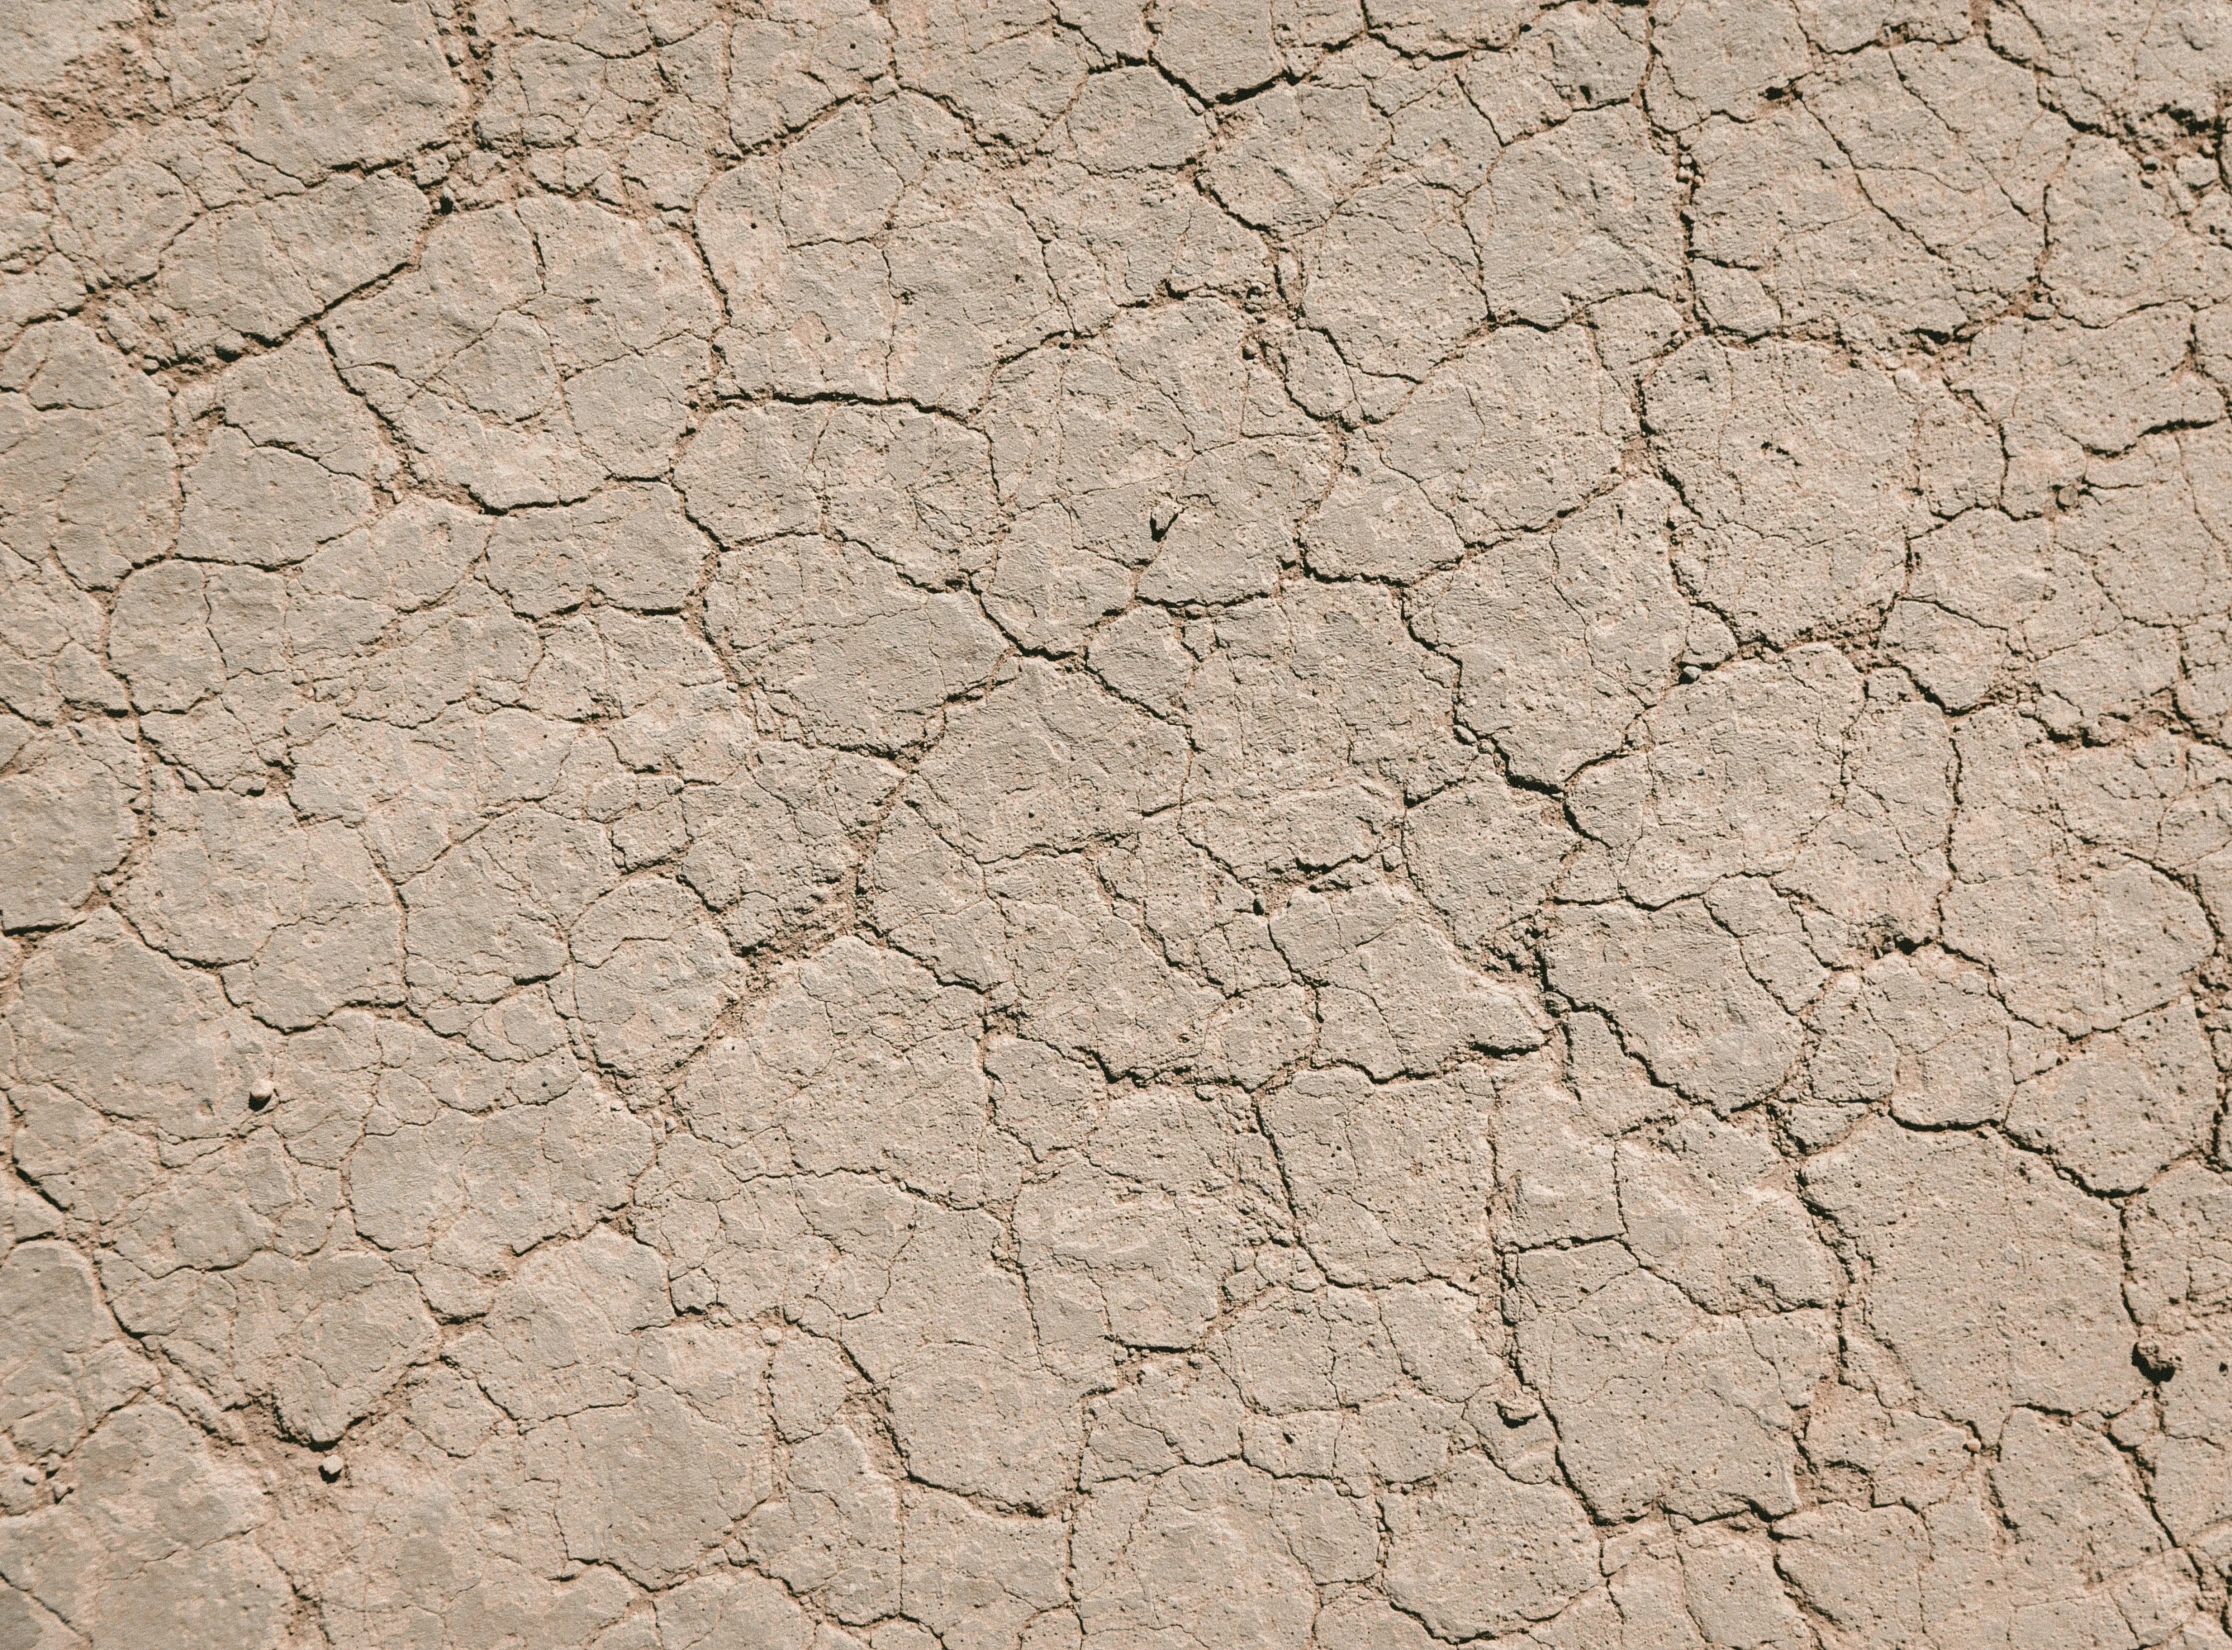 s in the ground of a dry desert landscape